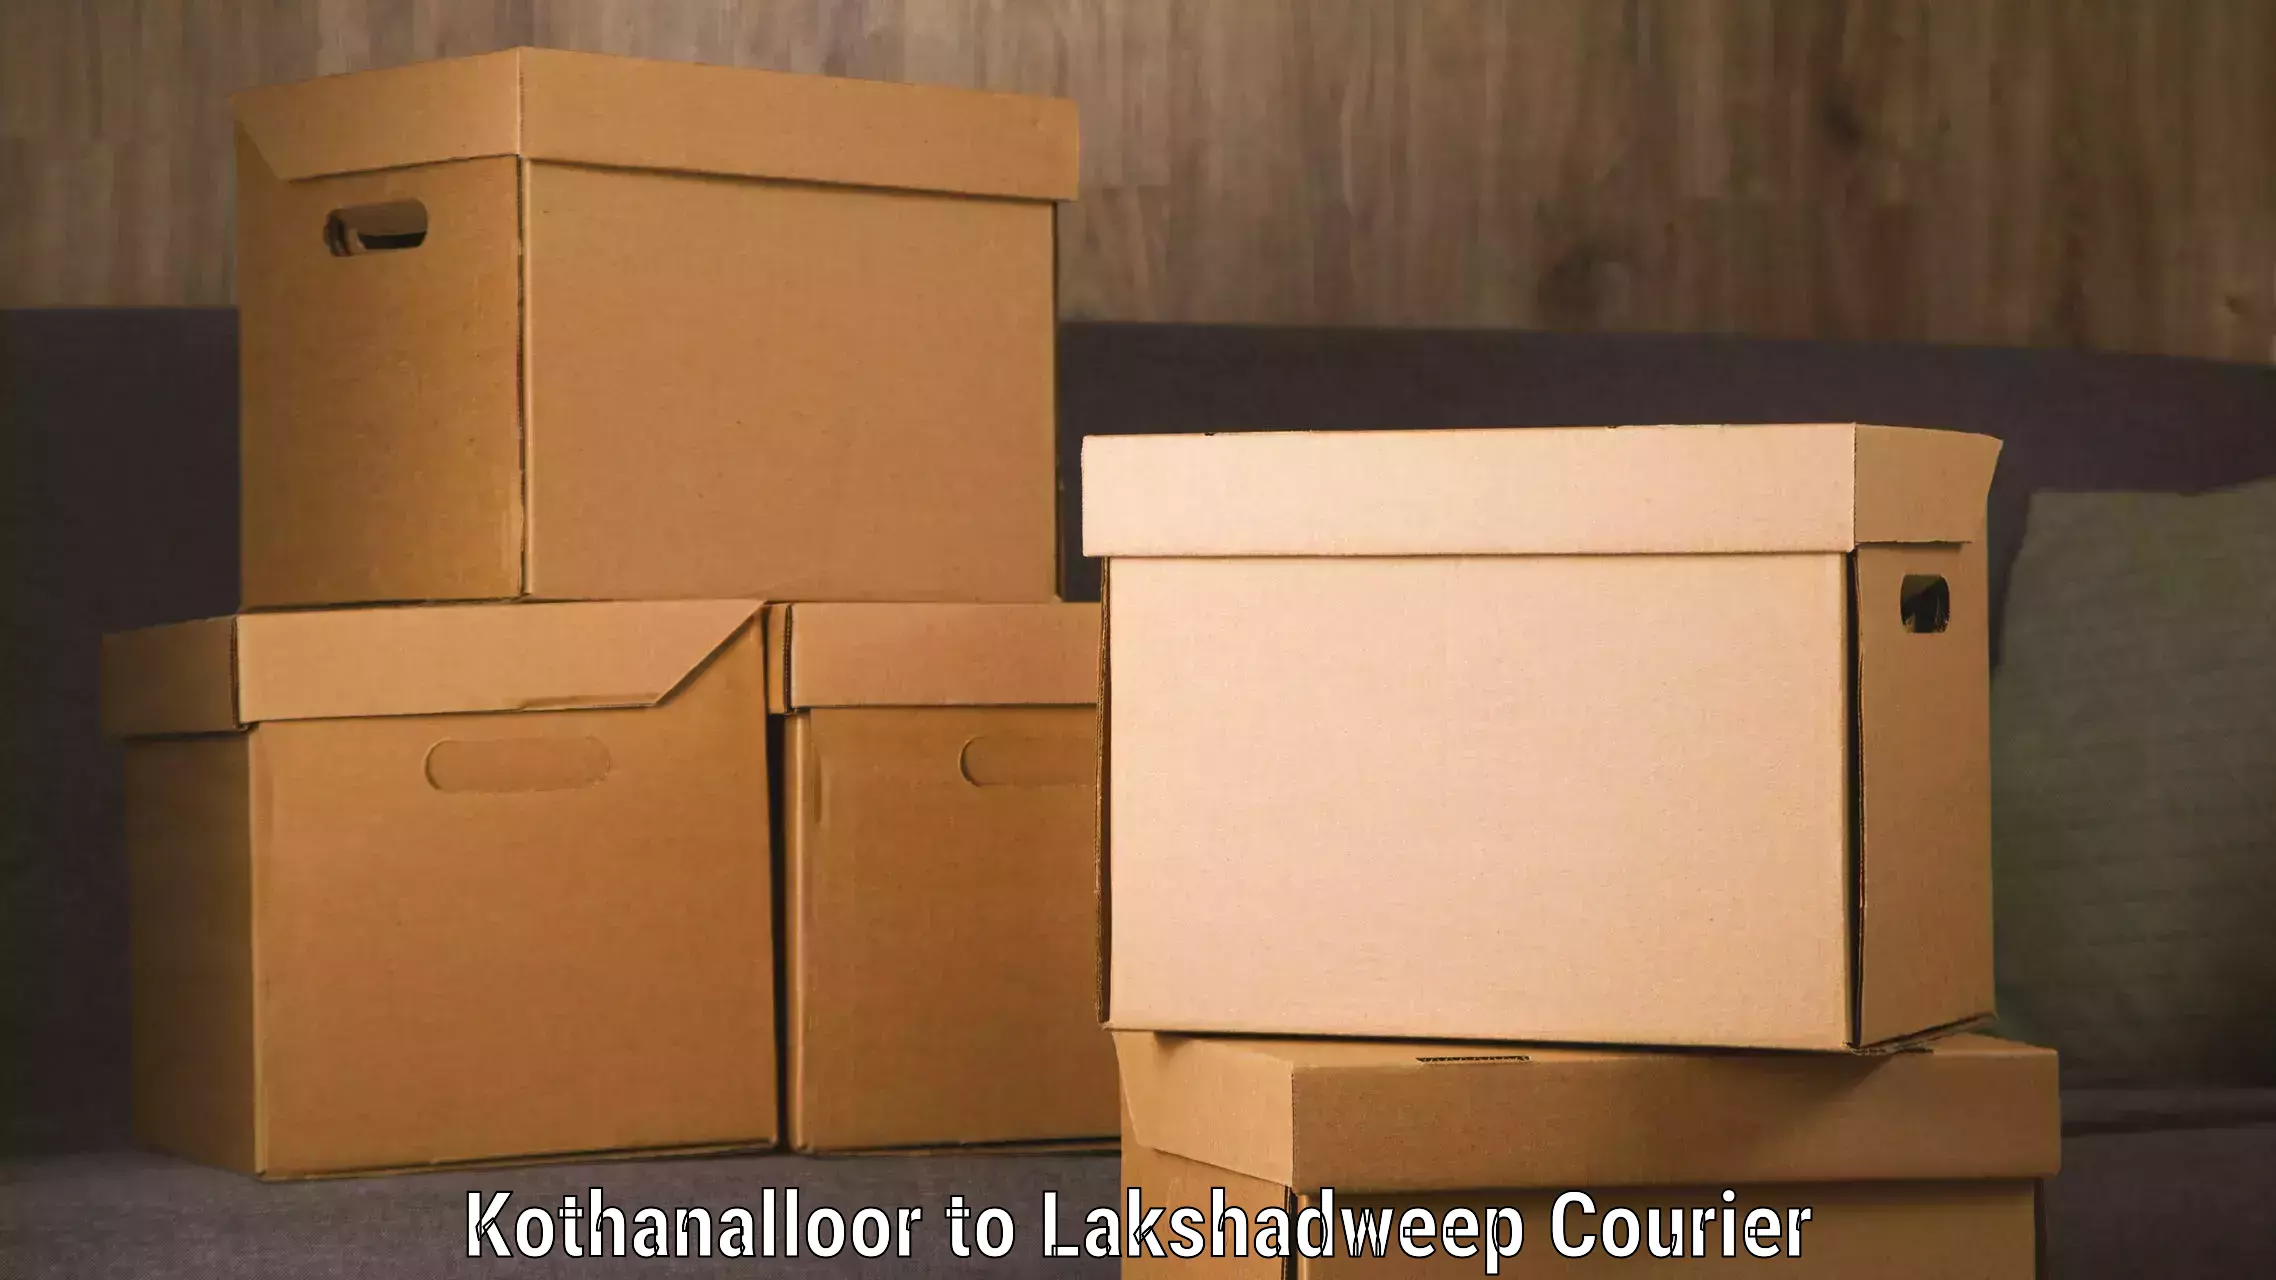 Fast delivery service Kothanalloor to Lakshadweep